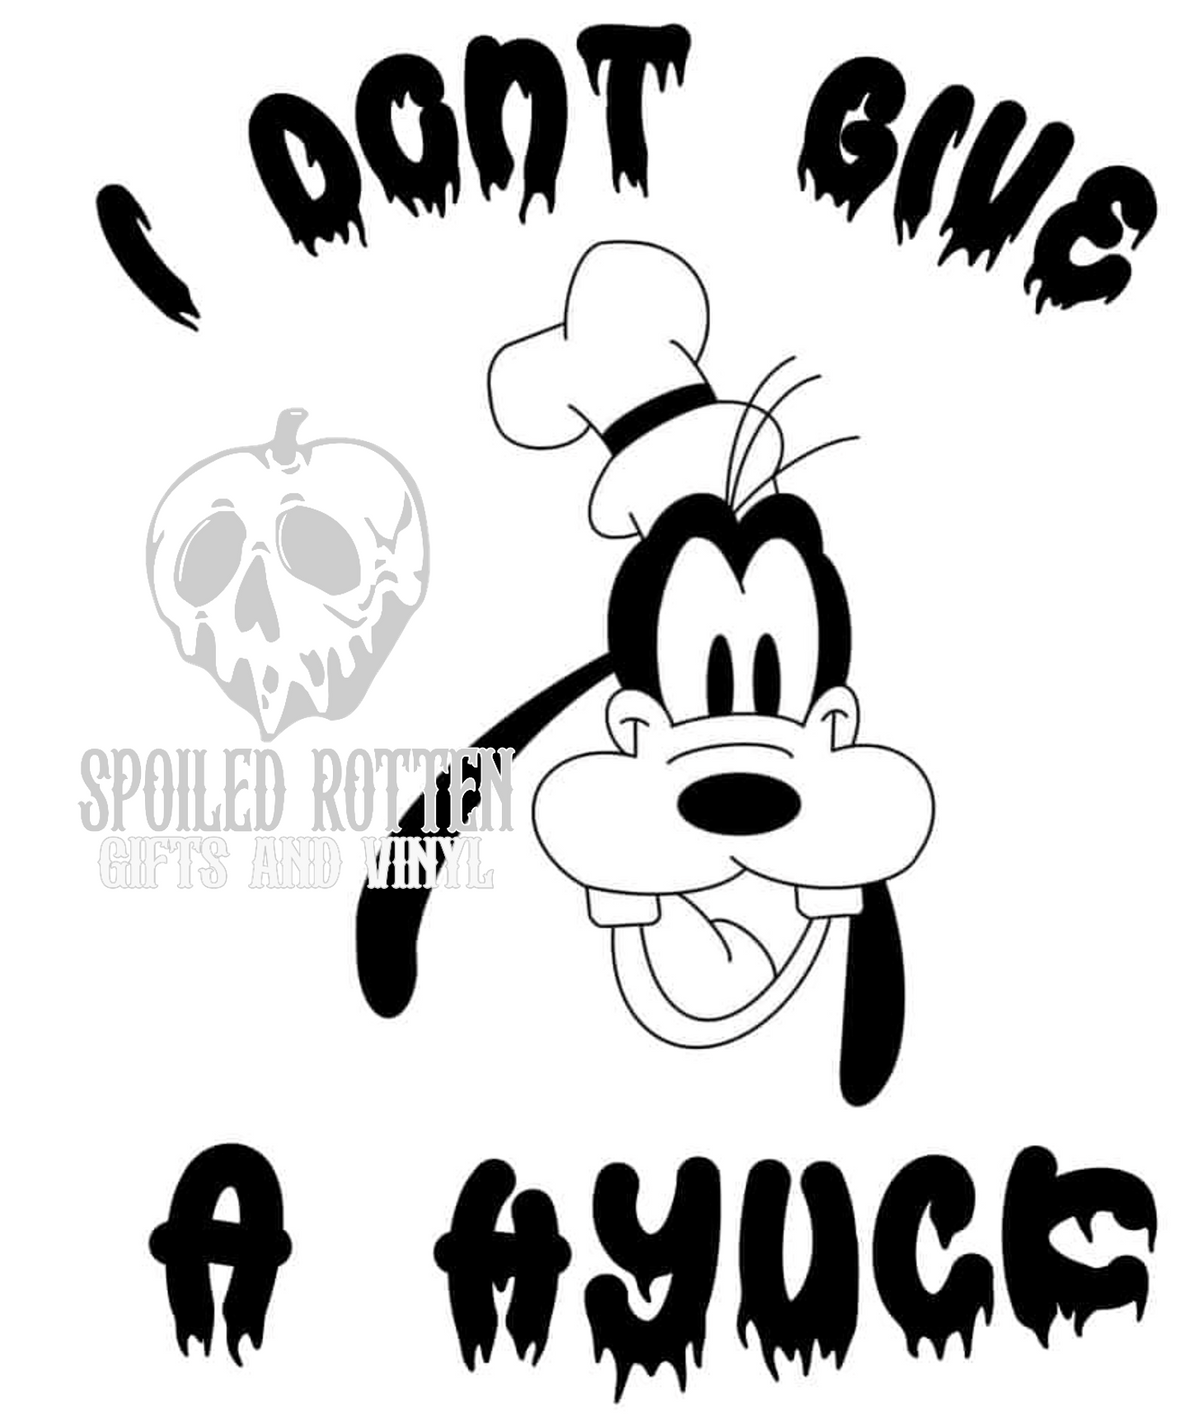 I Don't Give a Ayuck vinyl decal